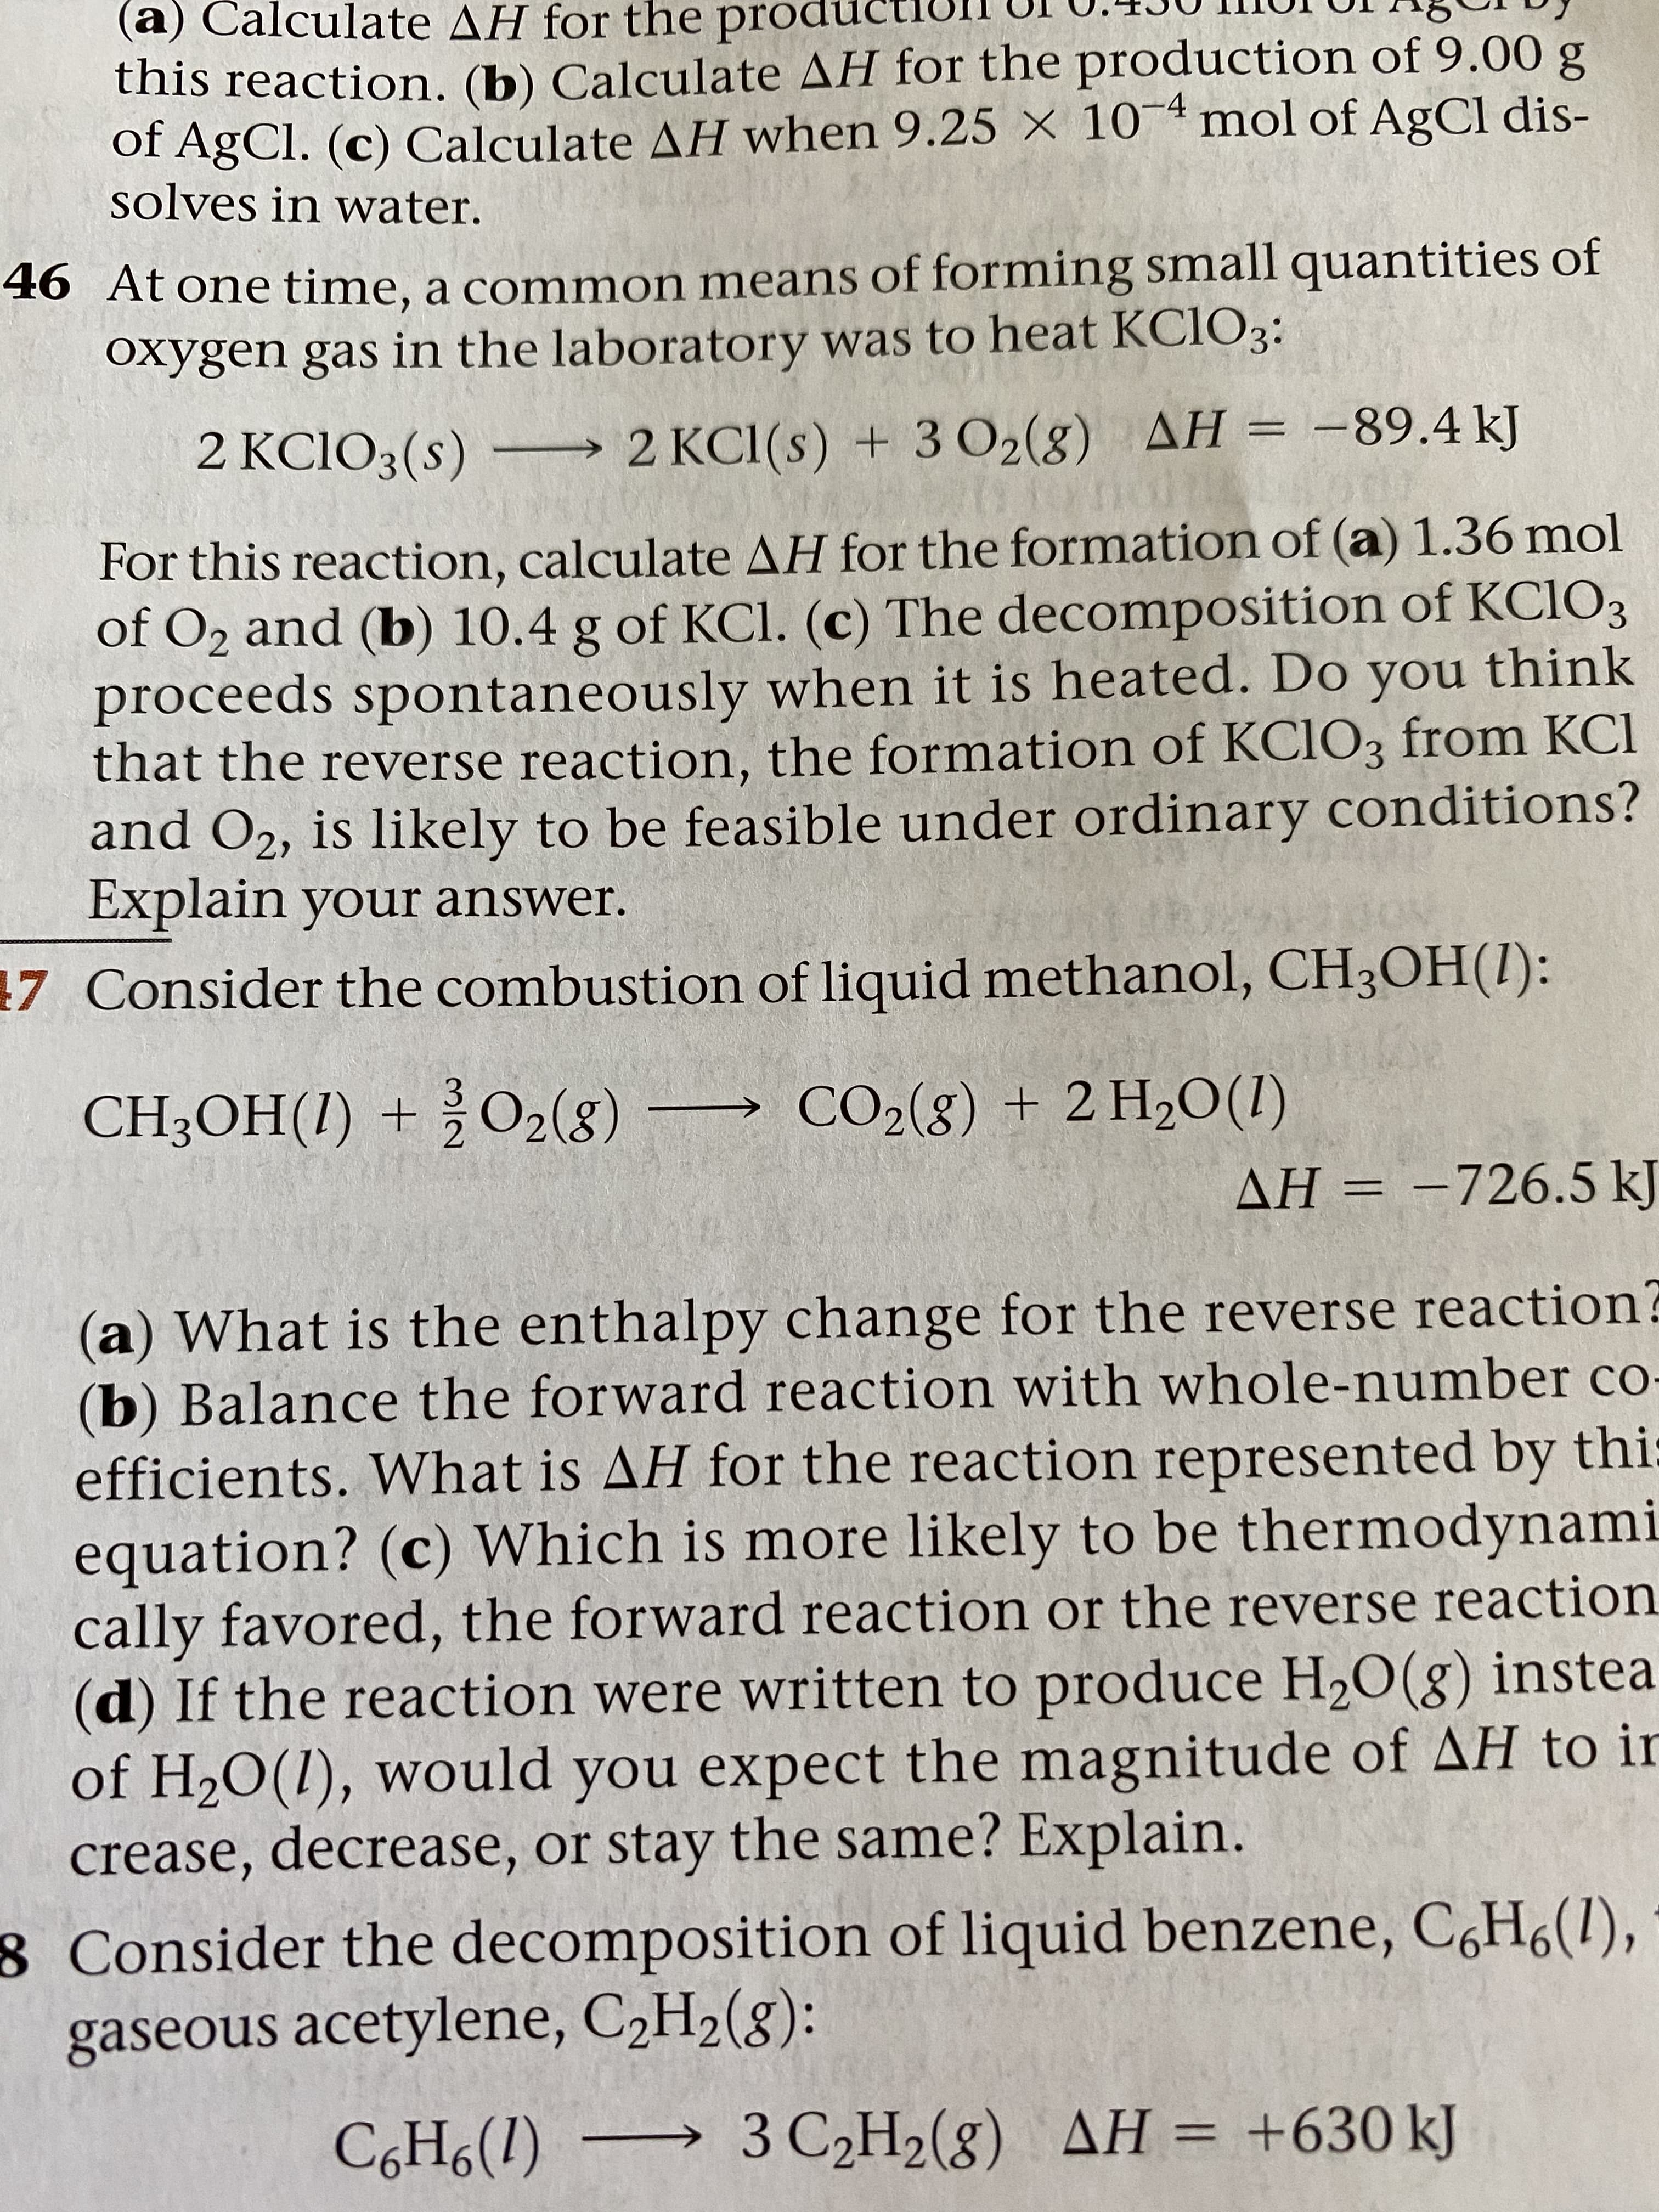 (a) Calculate AH for the producti
this reaction. (b) Calculate AH for the production of 9.00 g
of AgCl. (c) Calculate AH when 9.25 × 10¯4 mol of AgCl dis-
solves in water.
46 At one time, a common means of forming small quantities of
oxygen gas in the laboratory was to heat KCIO3:
2 KCIO3(s) –→ 2 KC1(s) + 3 O2(8) AH = -89.4 kJ
For this reaction, calculate AH for the formation of (a) 1.36 mol
of O2 and (b) 10.4 g of KCl. (c) The decomposition of KC1O3
proceeds spontaneously when it is heated. Do you think
that the reverse reaction, the formation of KC1O3 from KCl
and O2, is likely to be feasible under ordinary conditions?
Explain your answer.
7 Consider the combustion of liquid methanol, CH3OH(1):
CH3OH(1) + ¿O2(g)
→ CO2(g) + 2 H2O(1)
AH = -726.5 kJ
%3D
(a) What is the enthalpy change for the reverse reaction?
(b) Balance the forward reaction with whole-number co-
efficients. What is AH for the reaction represented by thi:
equation? (c) Which is more likely to be thermodynami
cally favored, the forward reaction or the reverse reaction
(d) If the reaction were written to produce H,O(g) instea
of H20(1), would you expect the magnitude of AH to ir
crease, decrease, or stay the same? Explain.
8 Consider the decomposition of liquid benzene, C,H6(1),
gaseous acetylene, C2H2(8):
C,H6(1) → 3 C2H2(g) AH = +630 kJ
%3D
